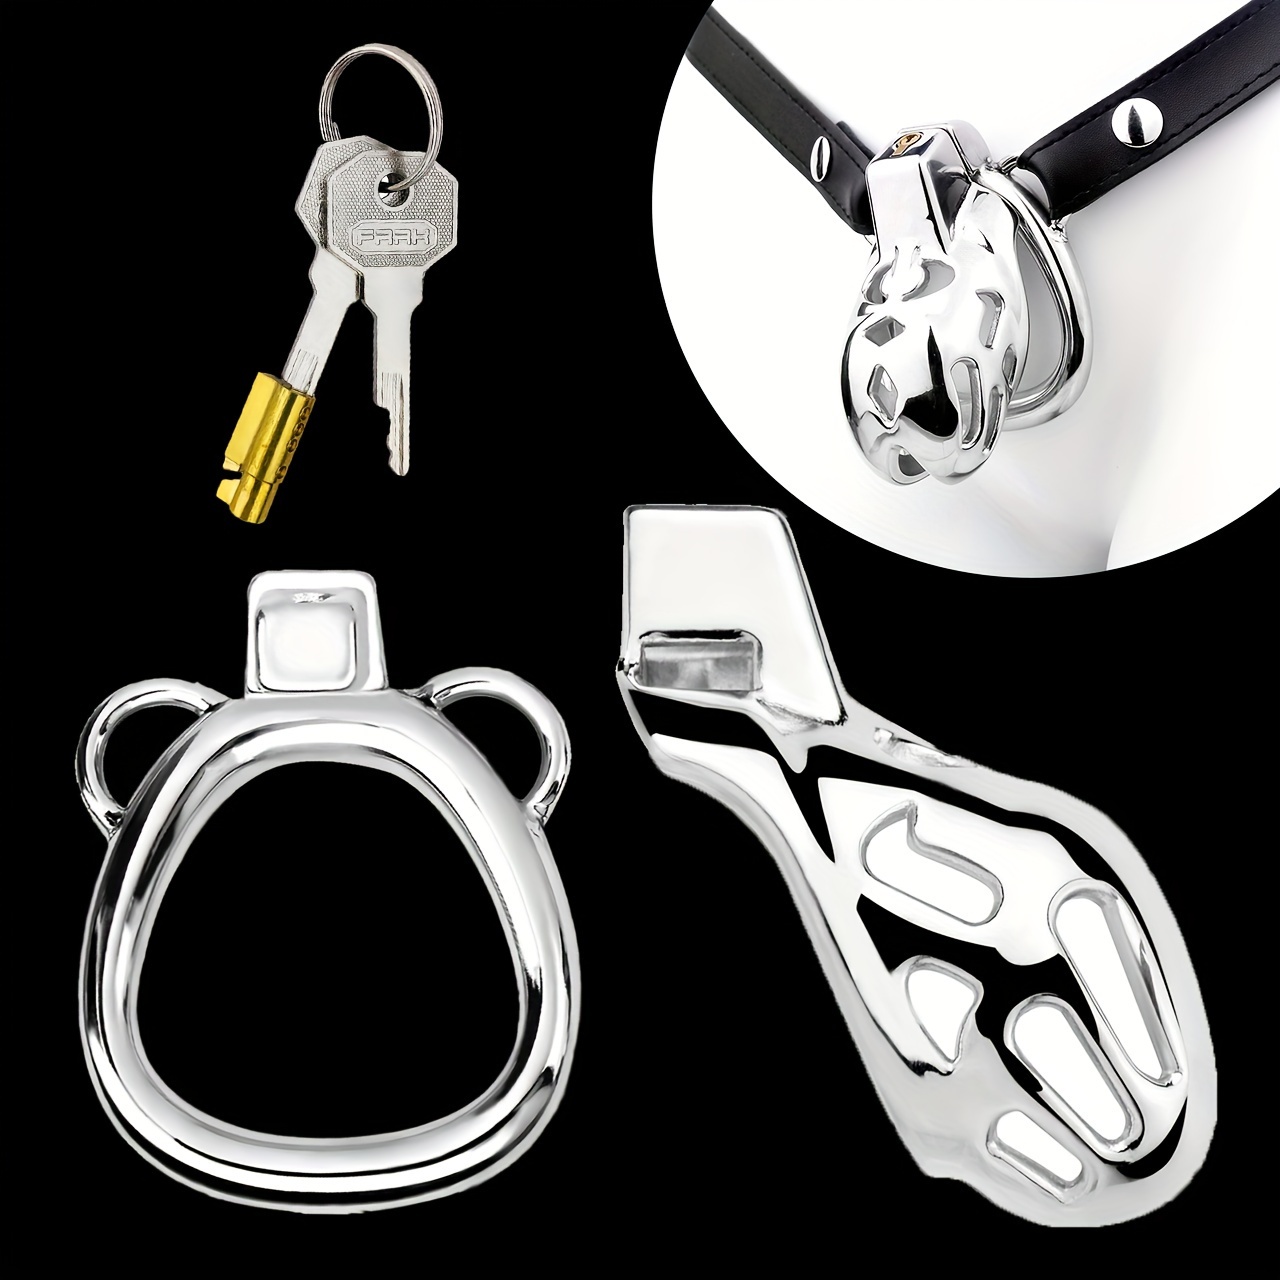 LEQC Chastity cage for Men Steel Chastity Devices Cock cage Male Chastity  Belts Penis cage &Door Sex Swing for Adult Couples Sex Swings Toy  Adjustable